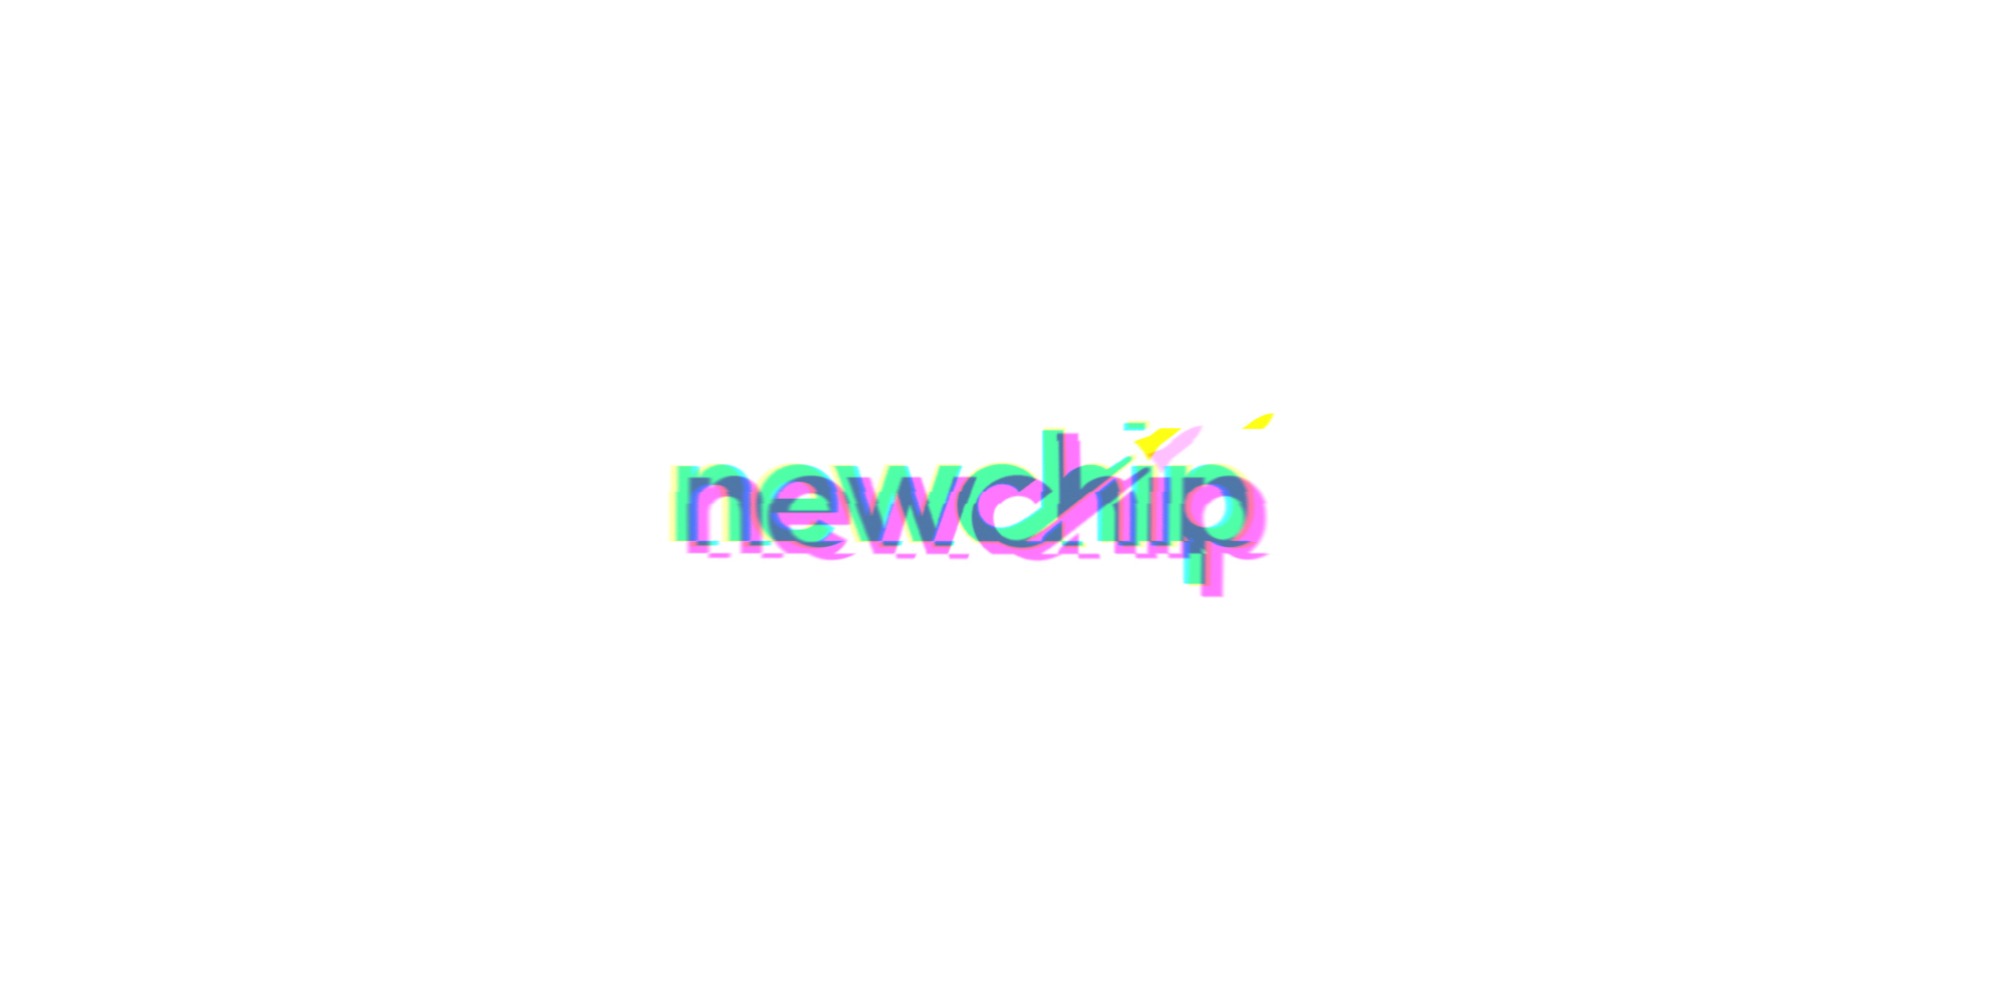 They thought they were joining an accelerator — instead they lost their startups How Newchip’s bankruptcy threatened the cap tables of thousands of startups